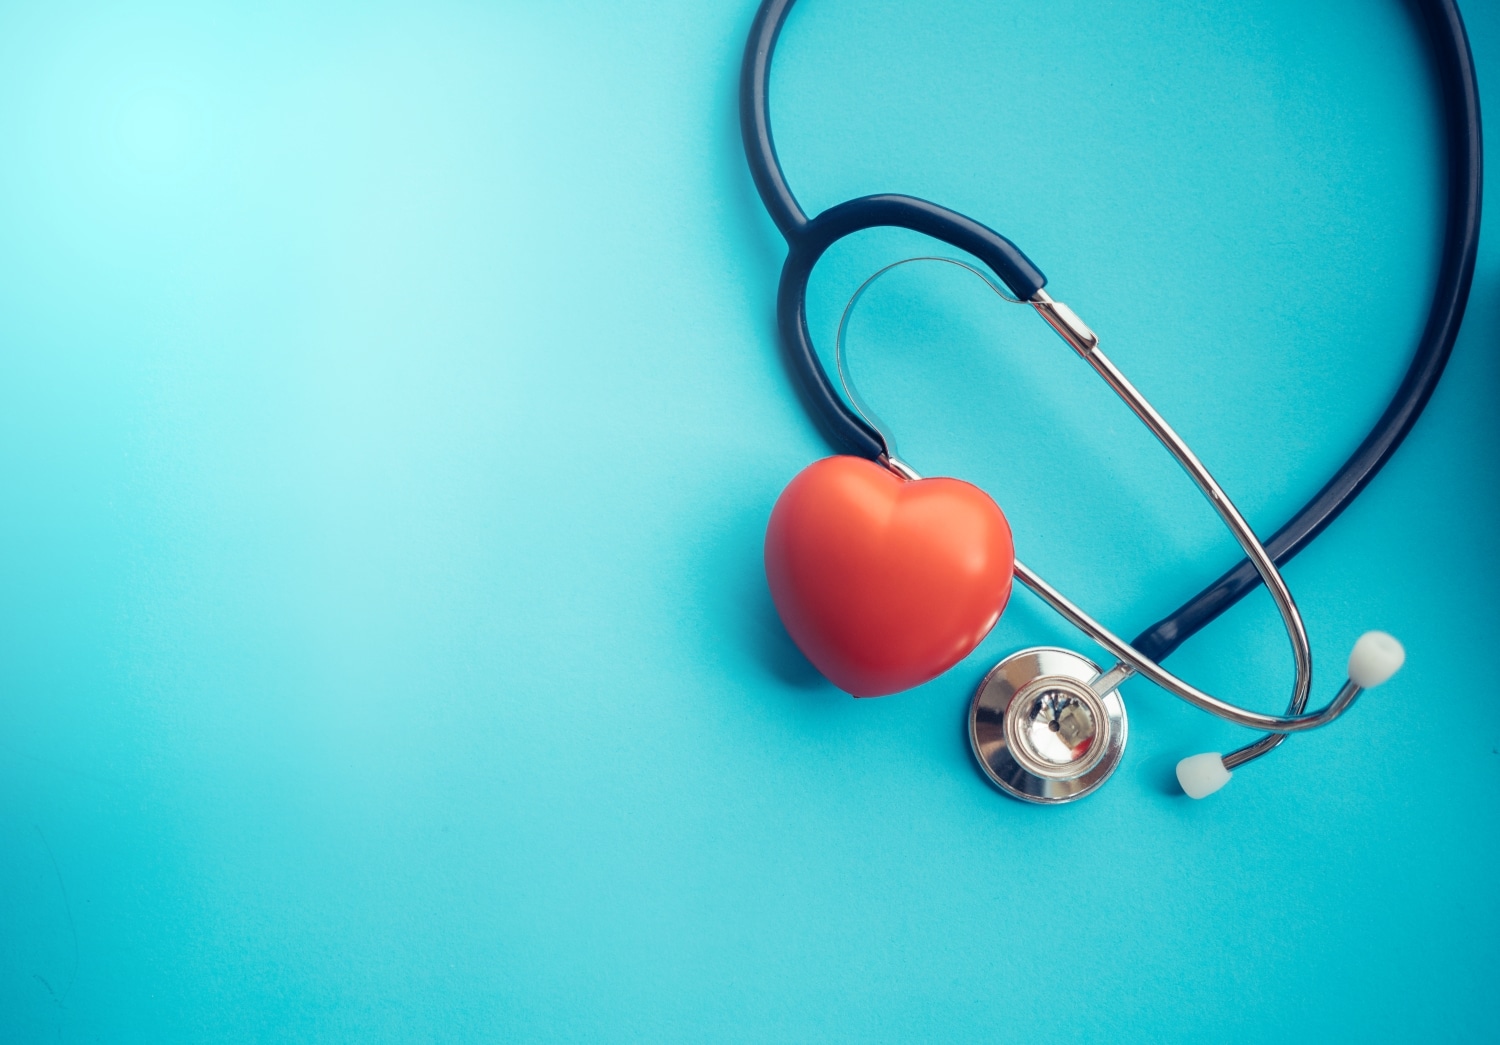 Stethoscope and a heart representing healthcare concept.